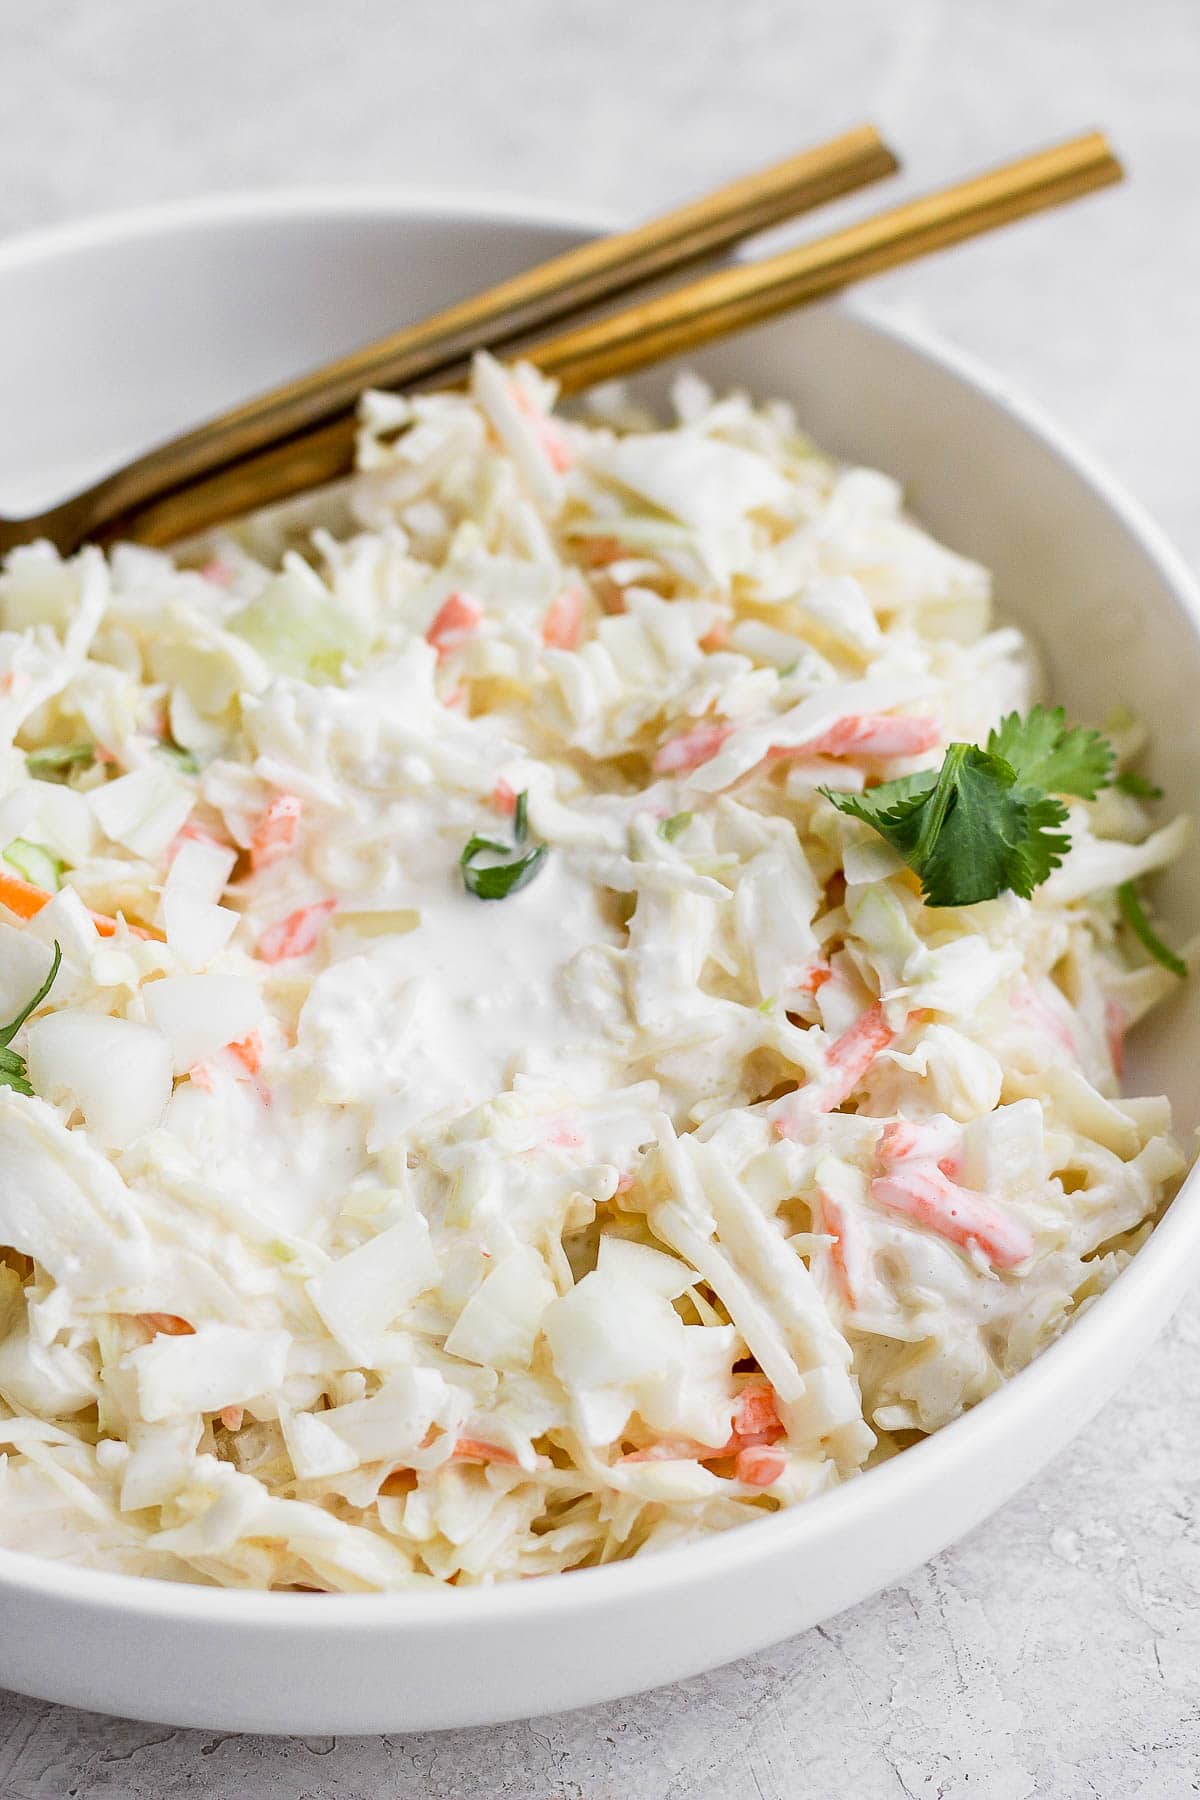 A bowl of creamy coleslaw with 2 spoons.